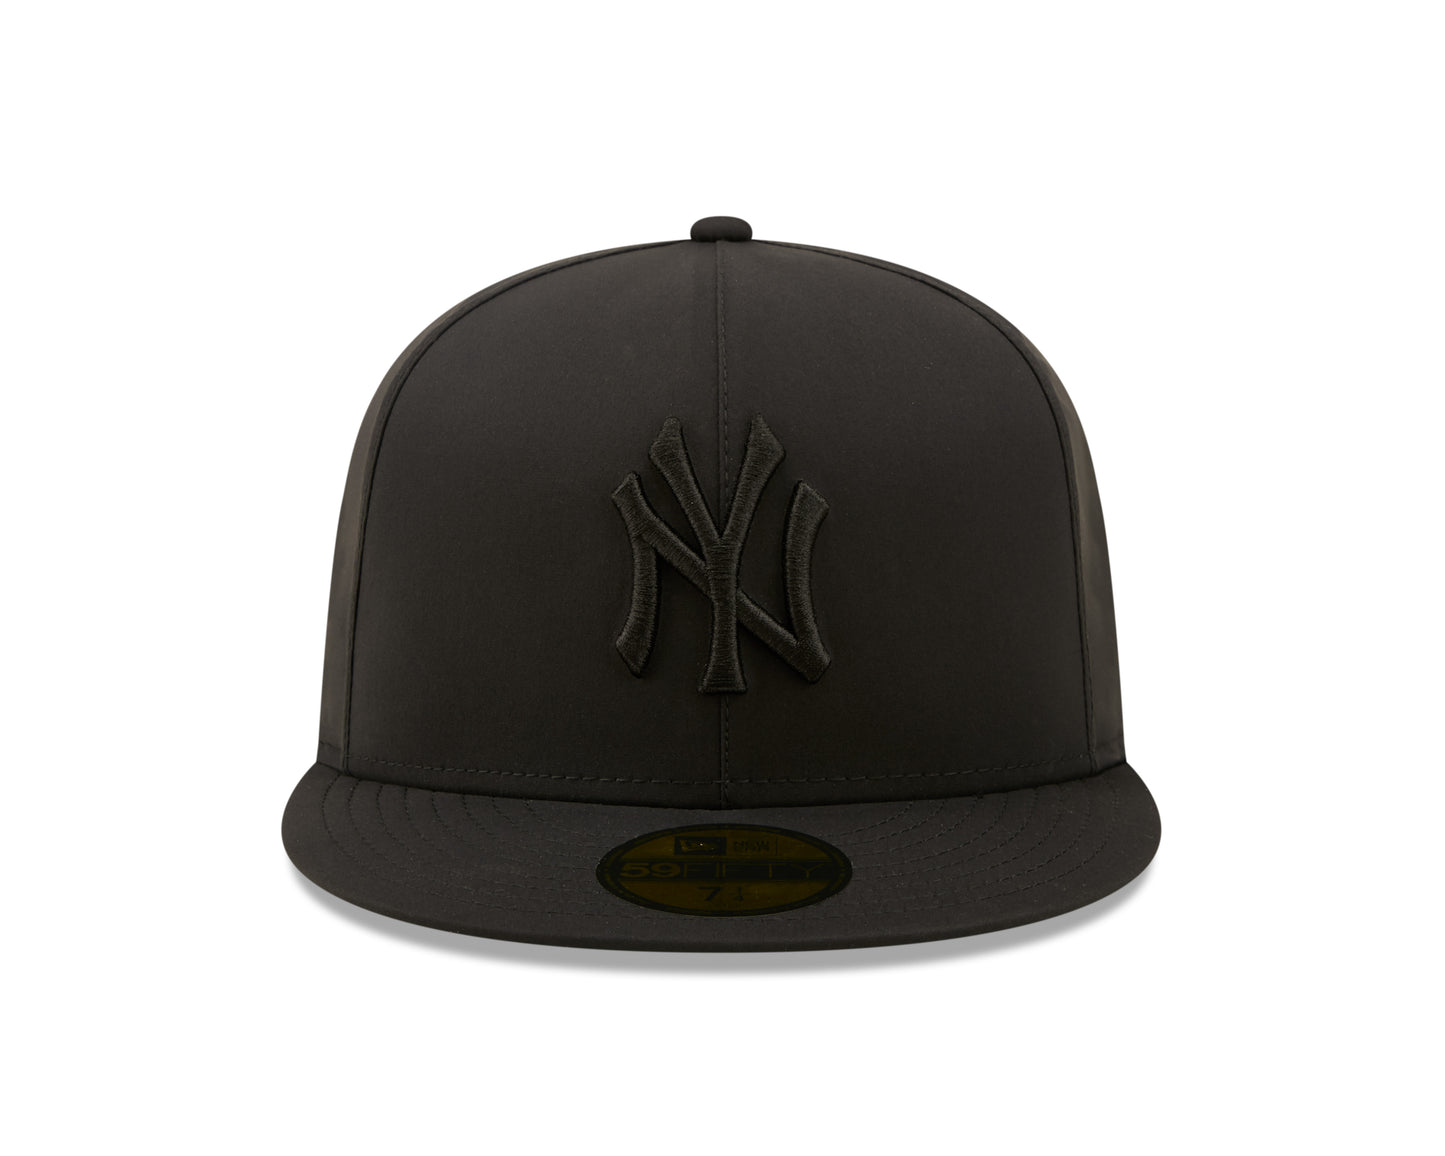 New York Yankees 59Fifty Fitted GORE-TEX - Black On Black - Headz Up 